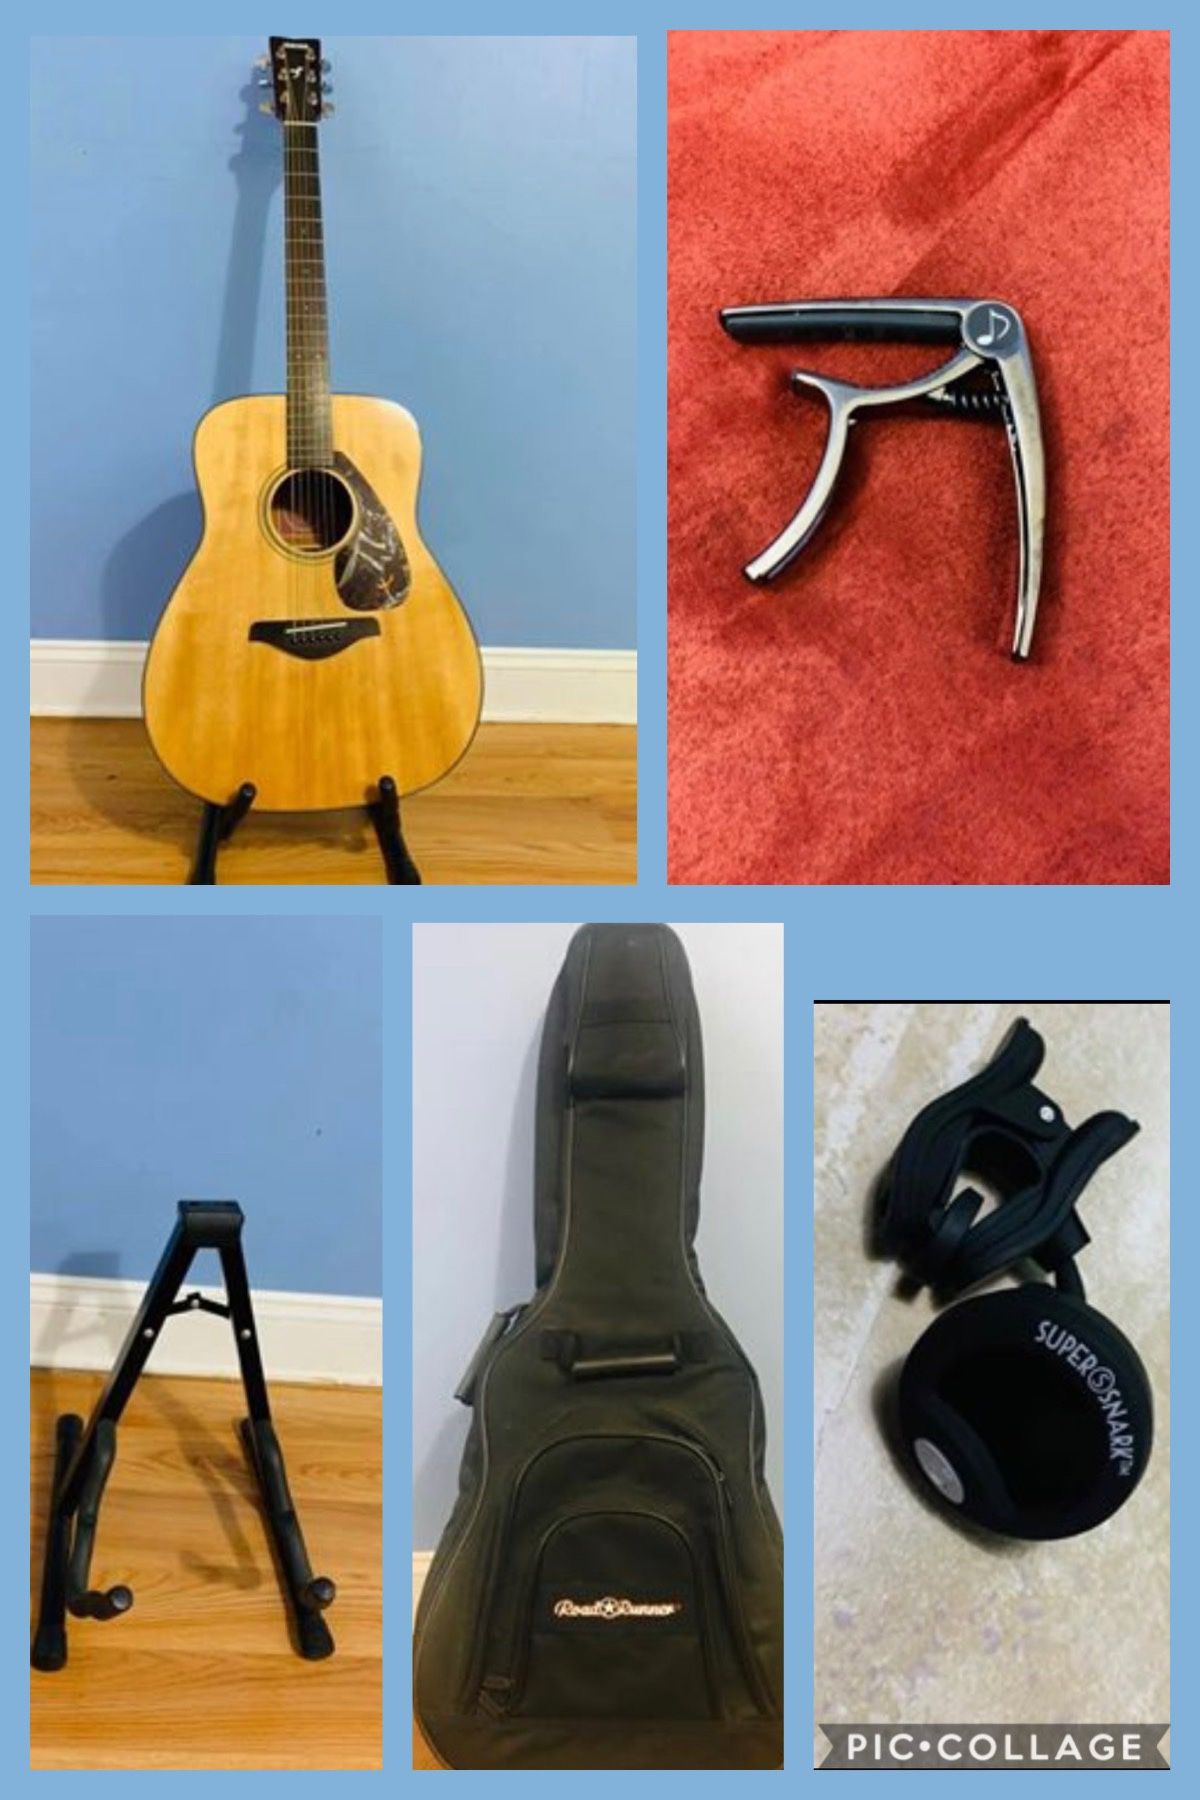 Yamaha Acoustic Guitar with all the accessories